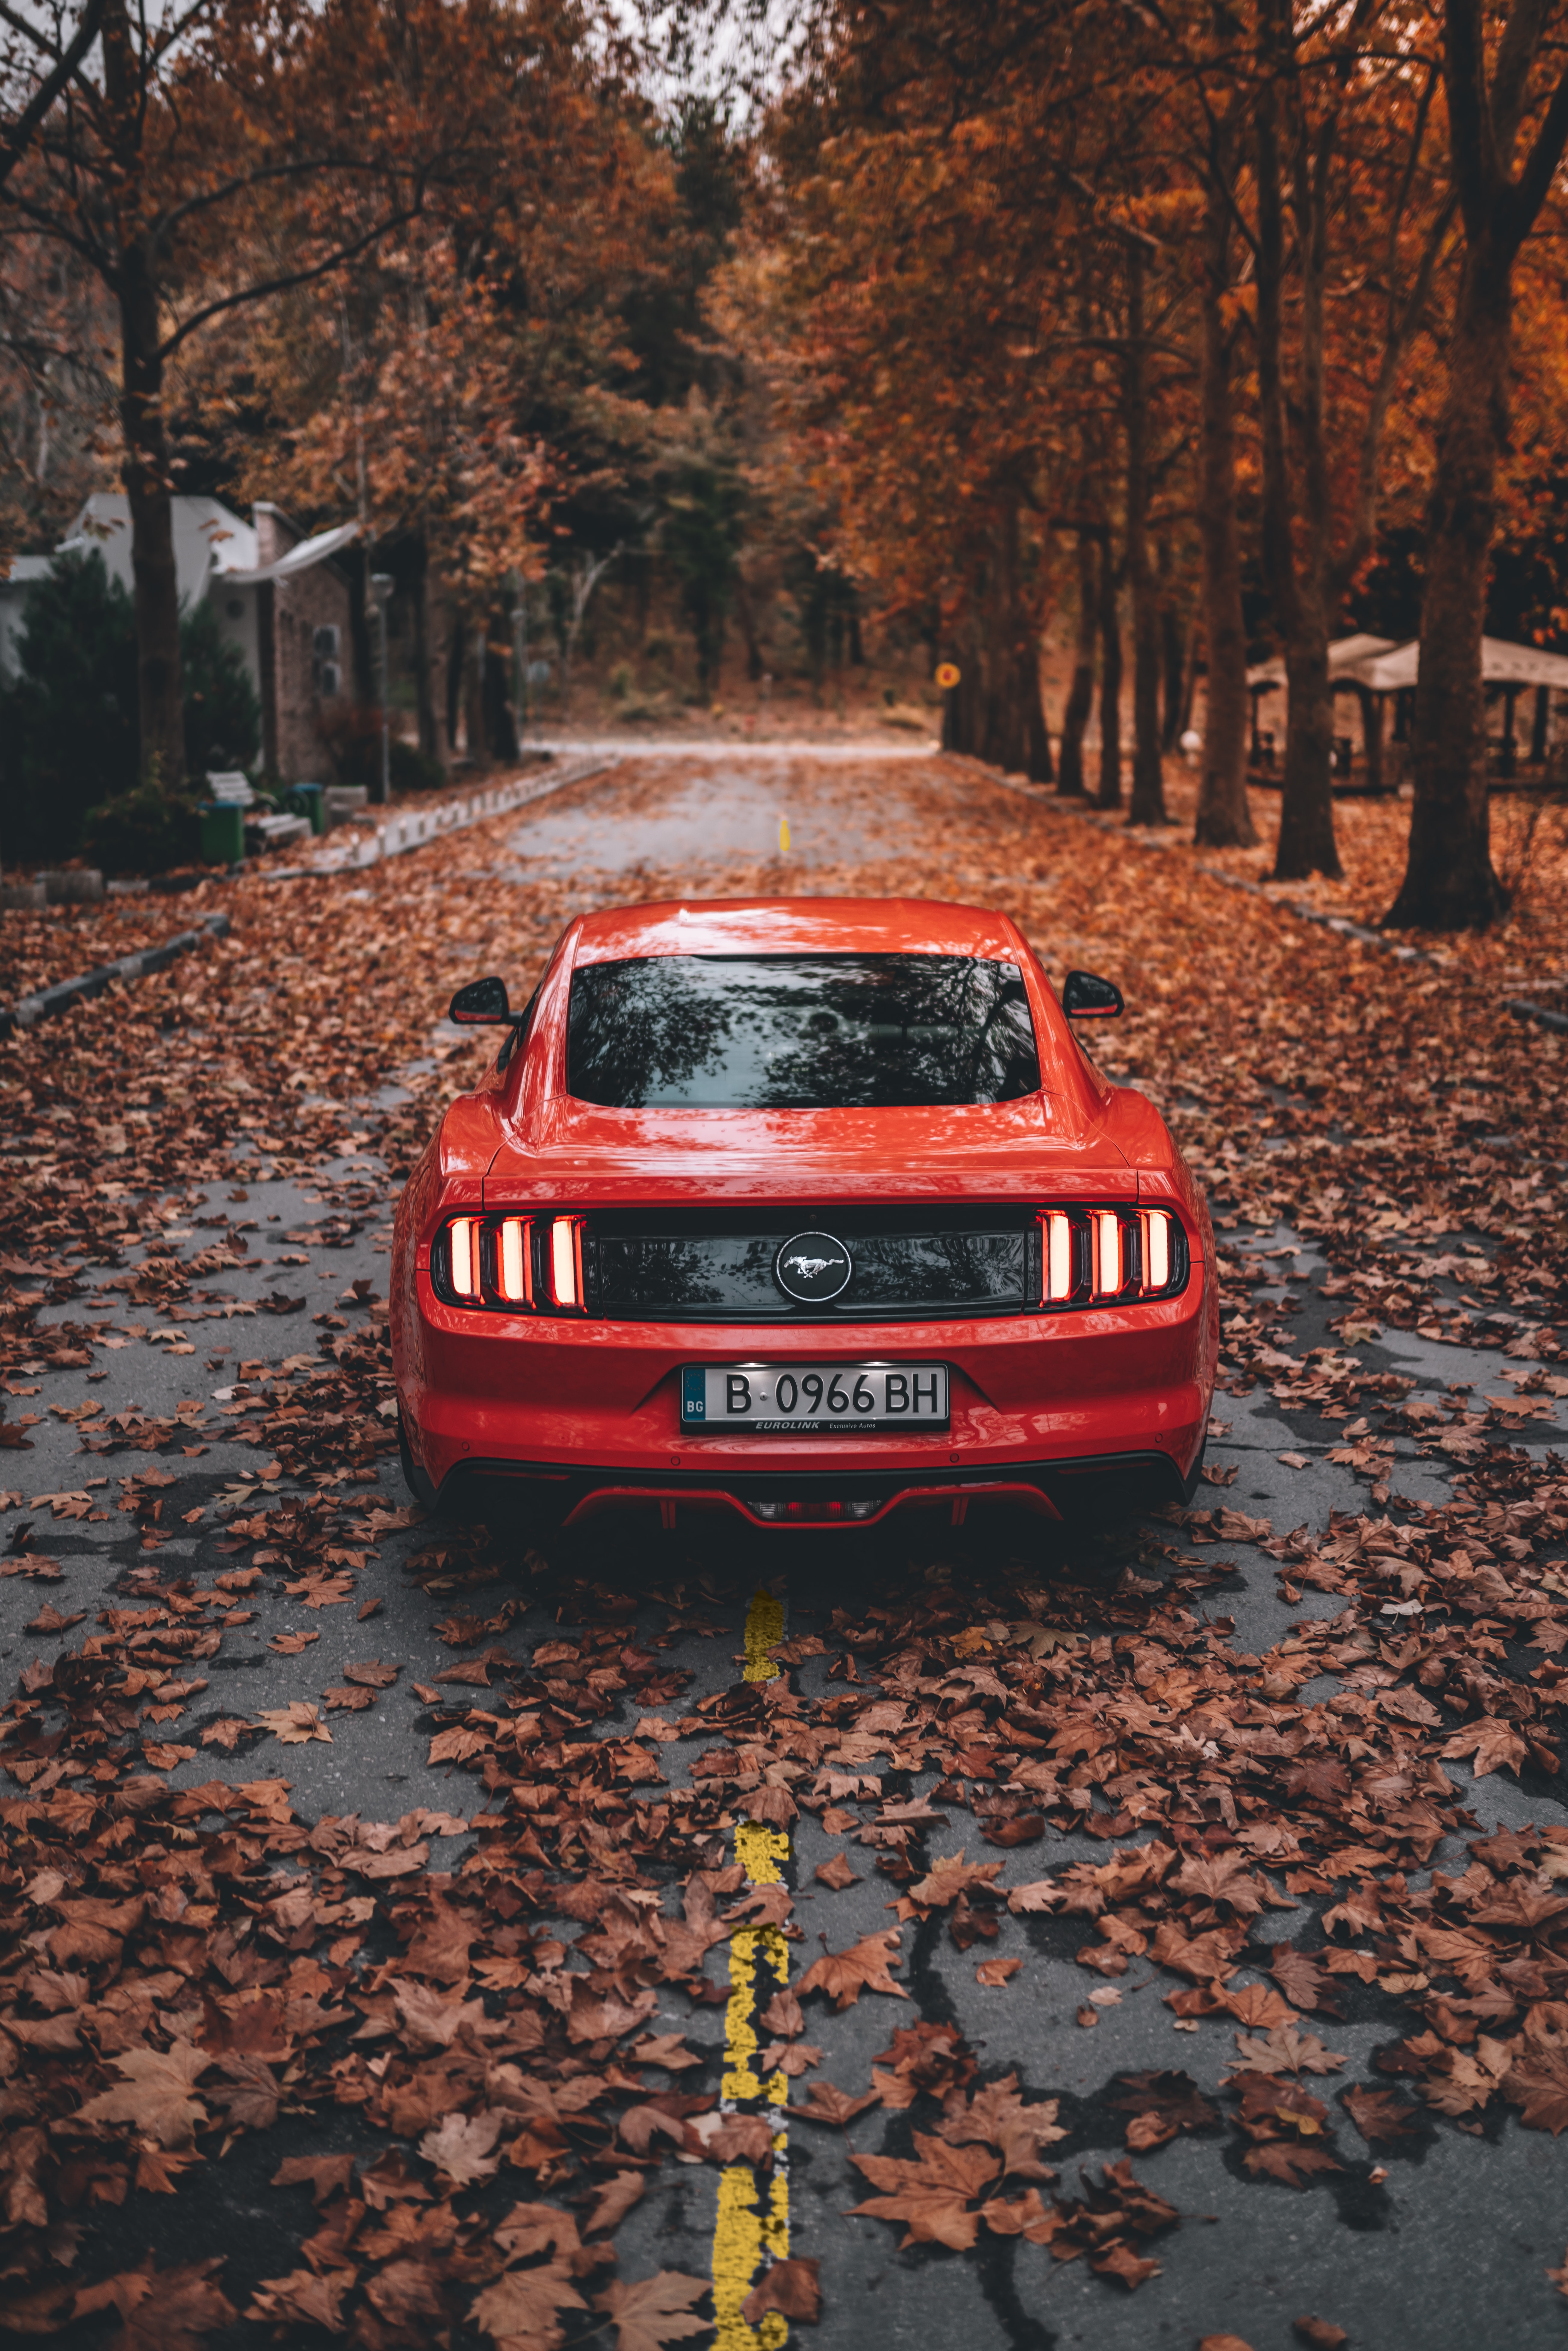 Best Ford Mustang phone Wallpapers